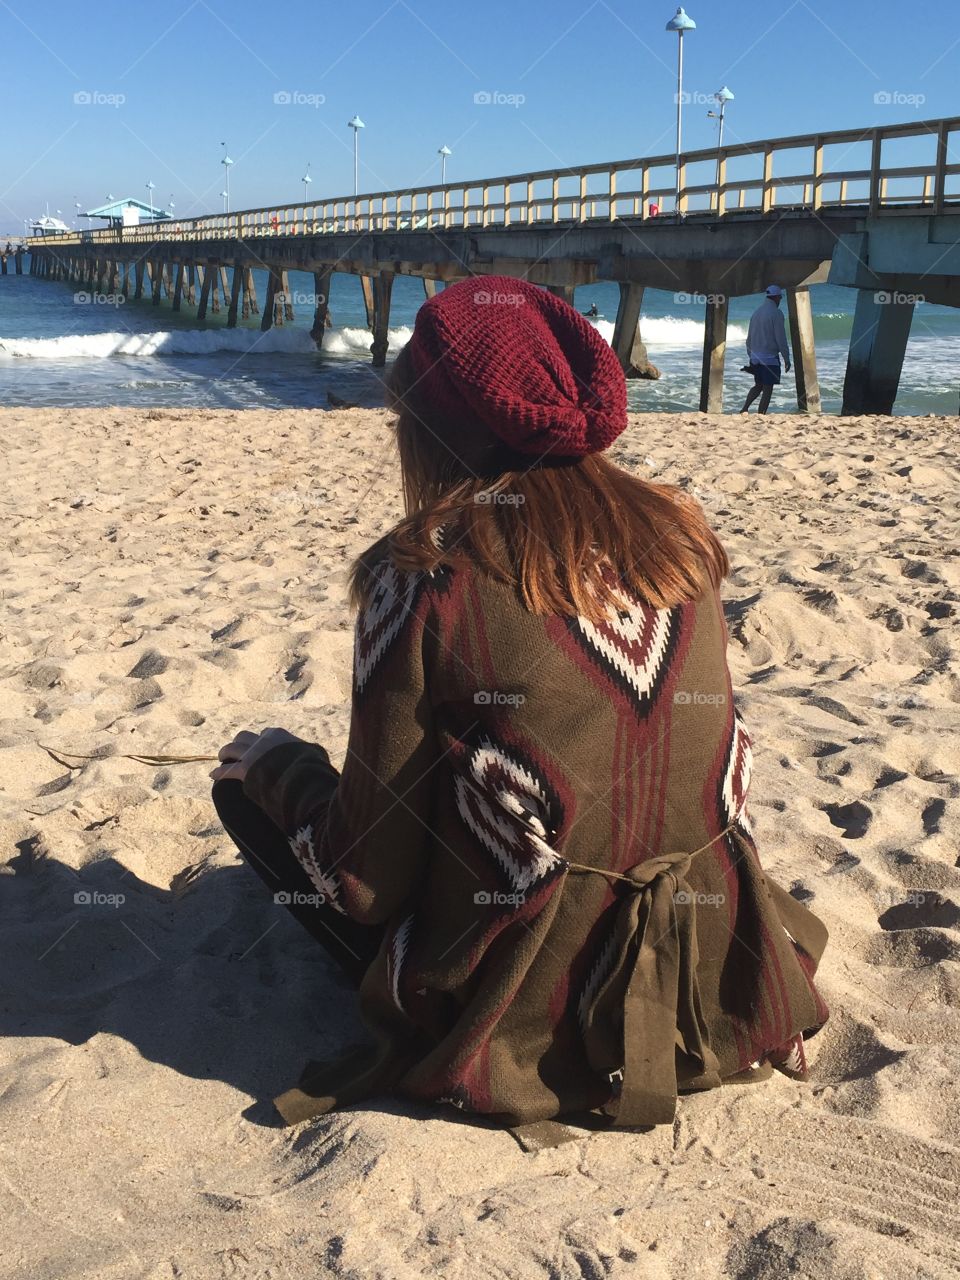 Cool day at the beach..,girl sitting on the beach looking out at the water while being bundled up. 